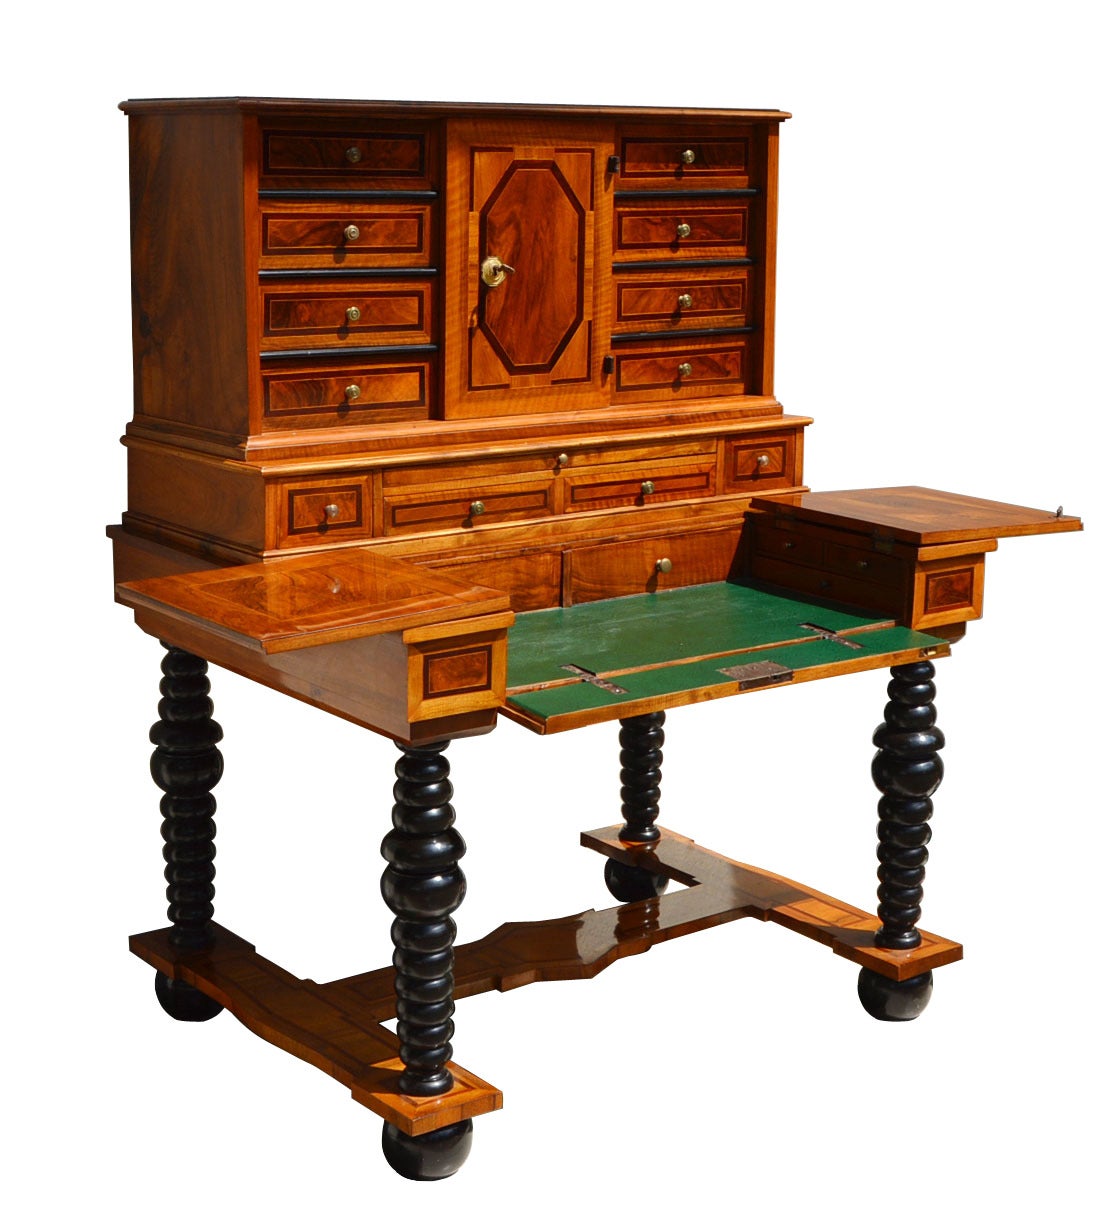 Late 18th Century Baroque Period Tabernacle Desk, Würzburg, 1790s For Sale